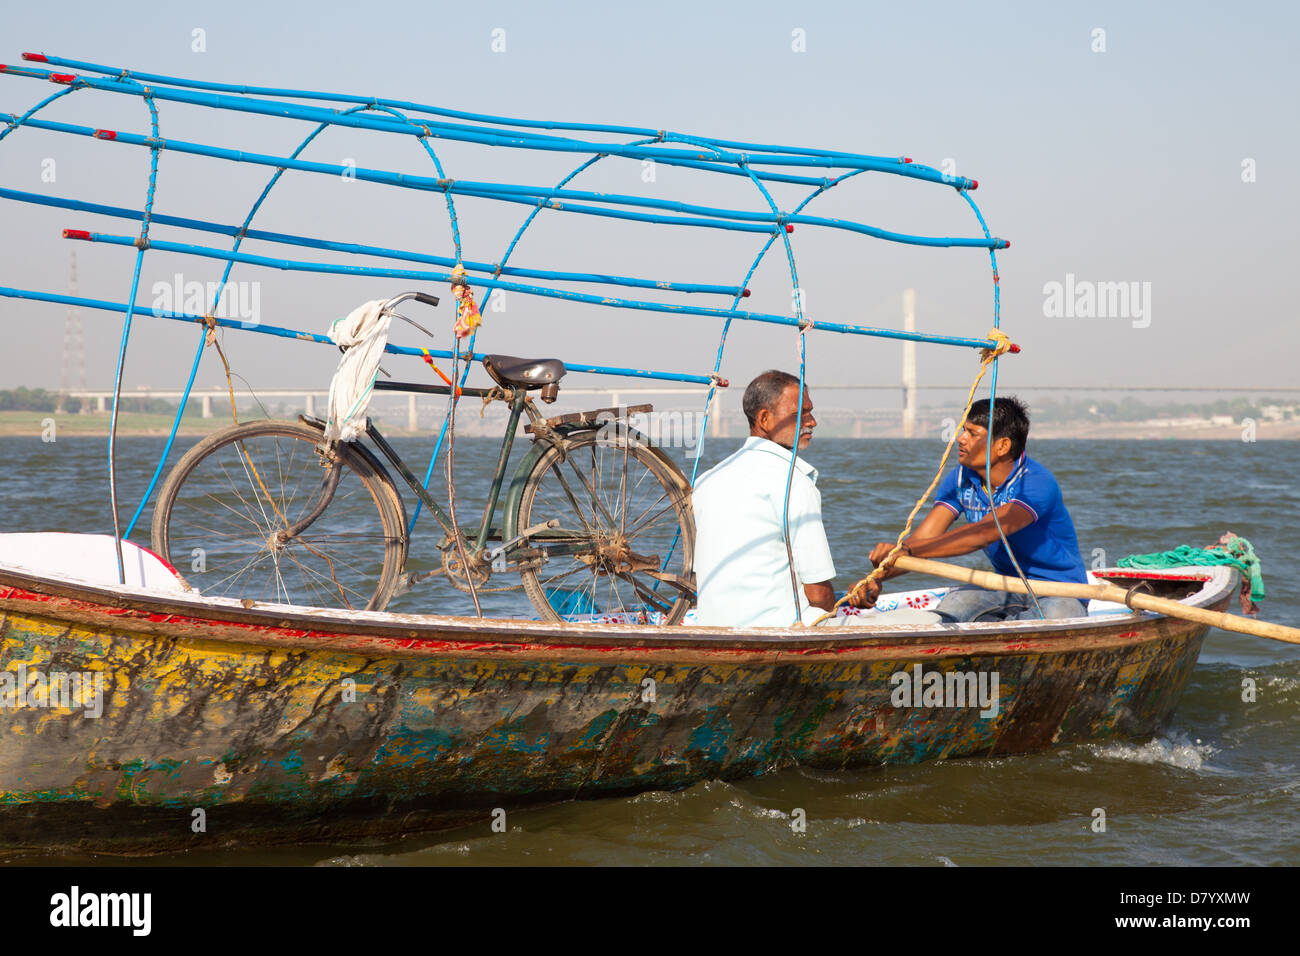 https://c8.alamy.com/comp/D7YXMW/carrying-bicycle-on-a-boat-at-the-meeting-of-rivers-ganga-and-yamuna-D7YXMW.jpg